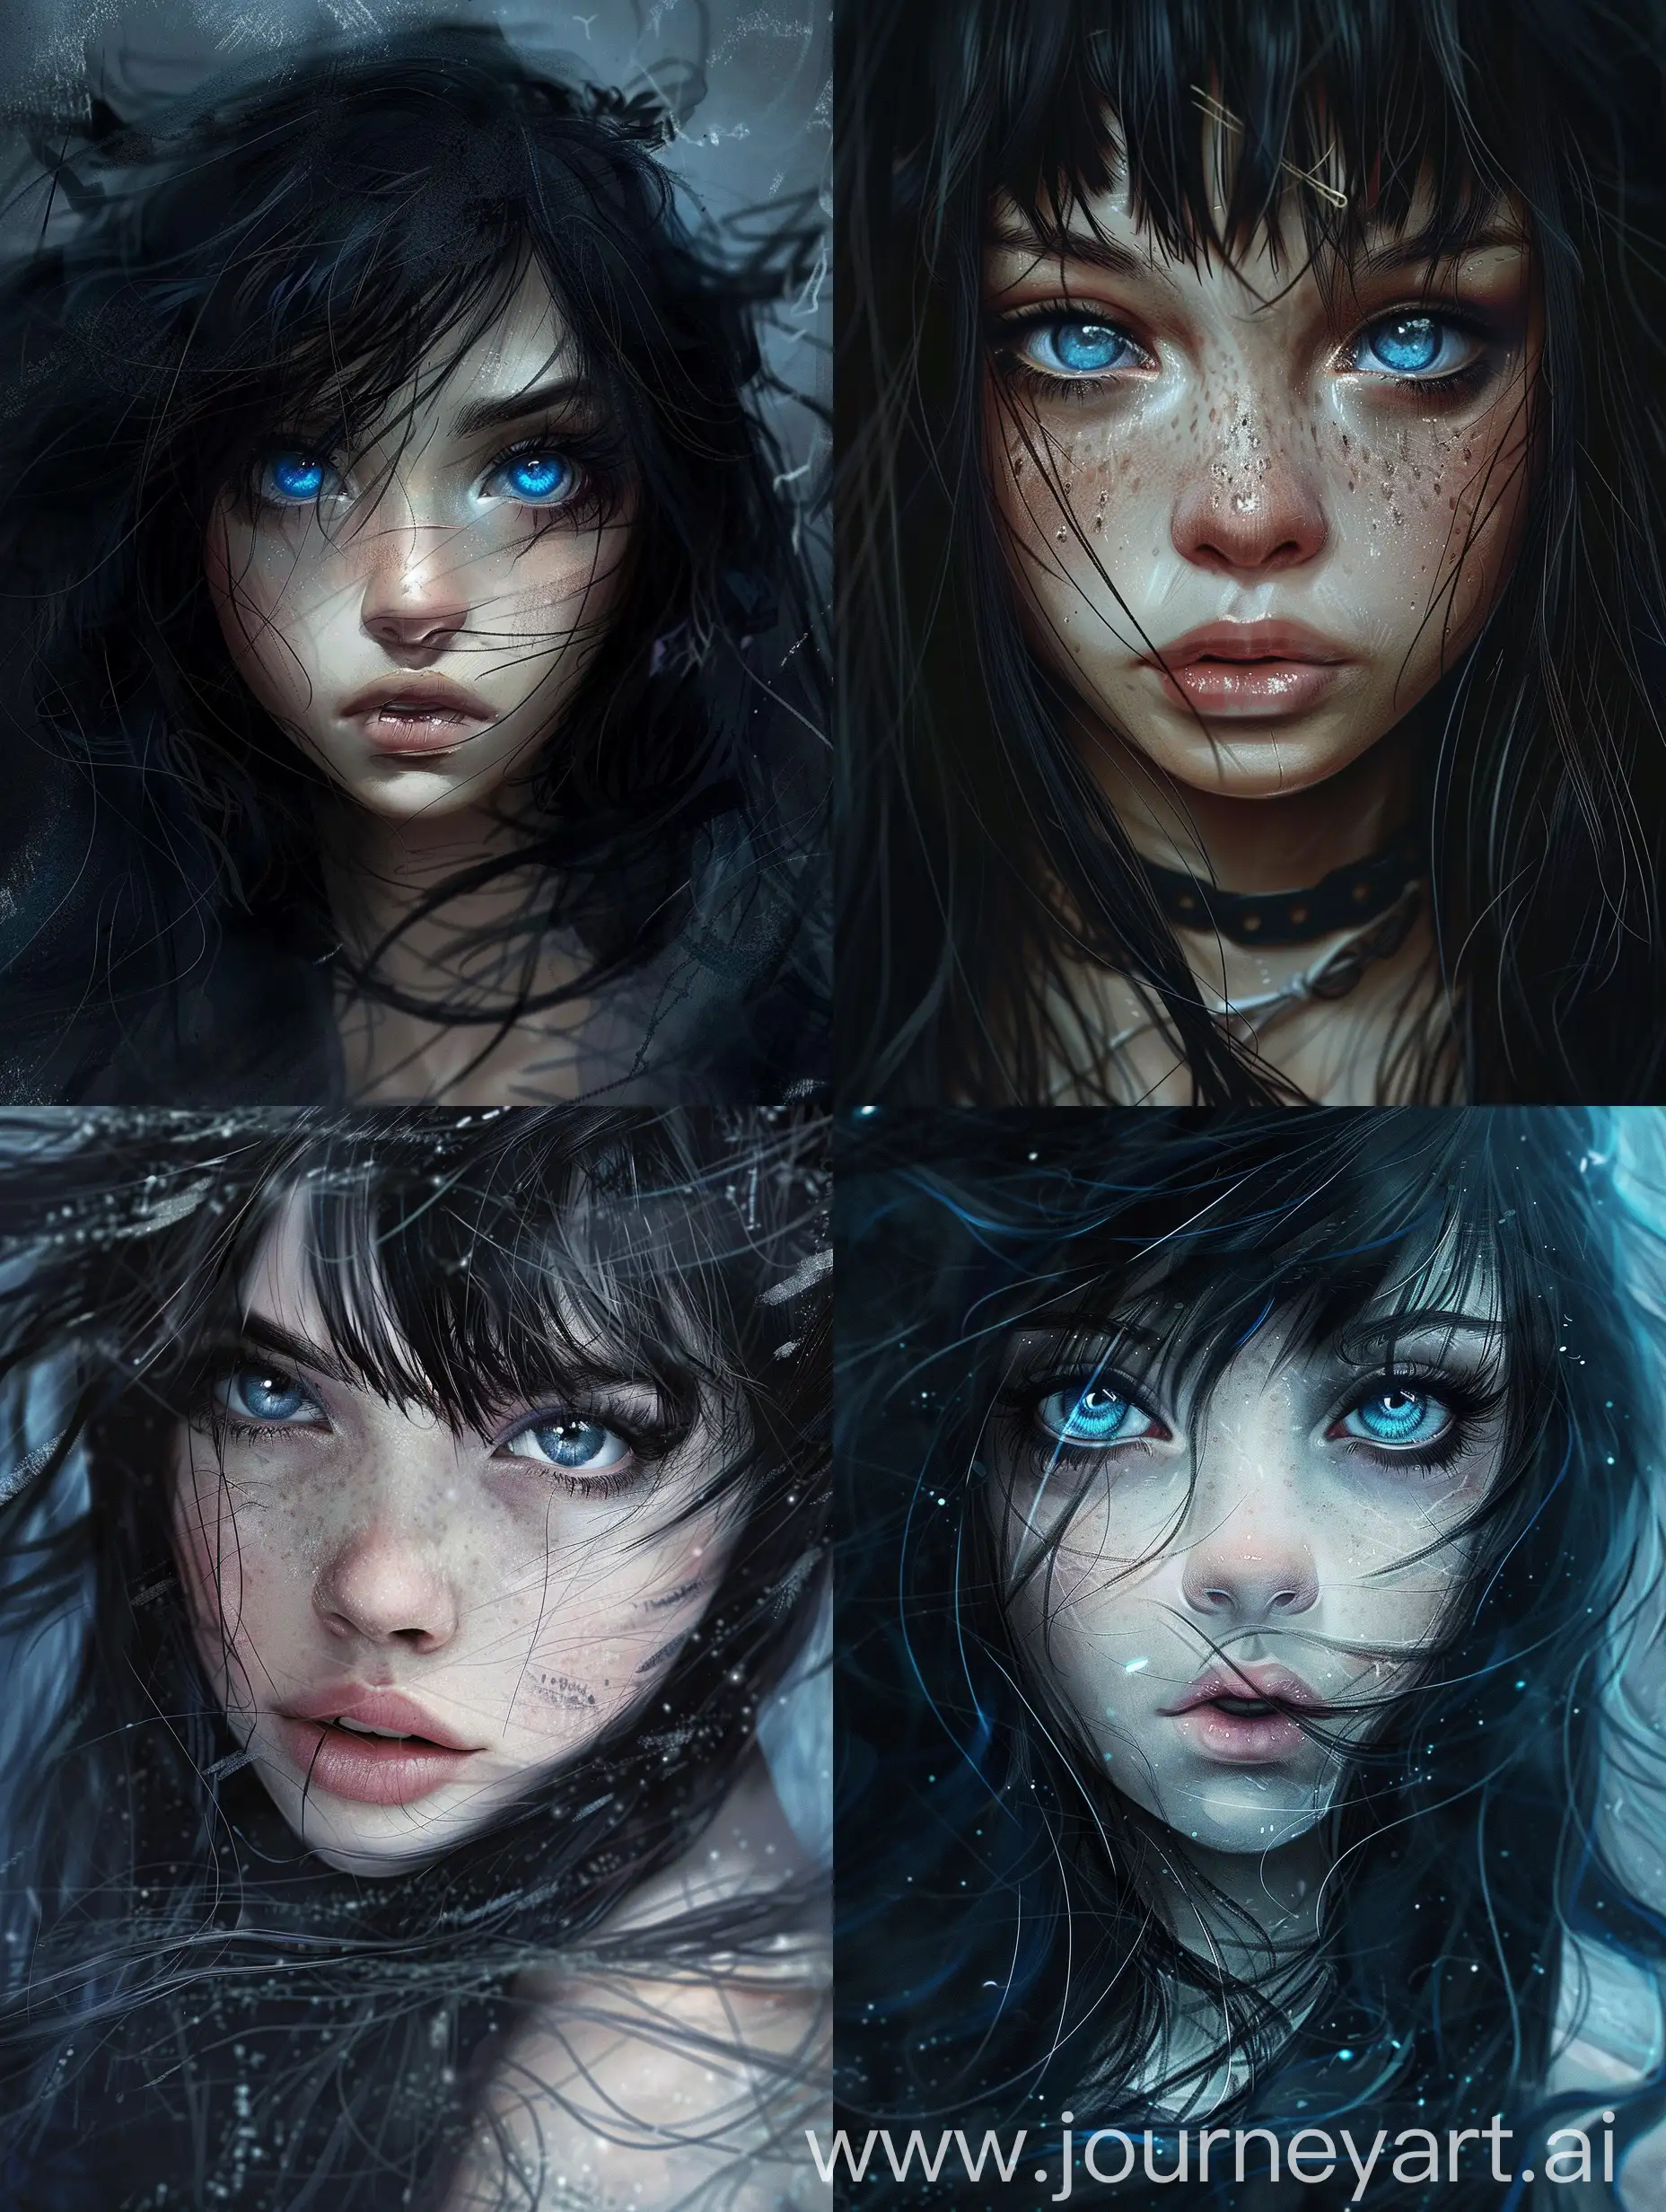 Enchanted-Girl-with-Cursed-Gift-Fantasy-Art-of-a-DarkHaired-Maiden-with-Blue-Eyes